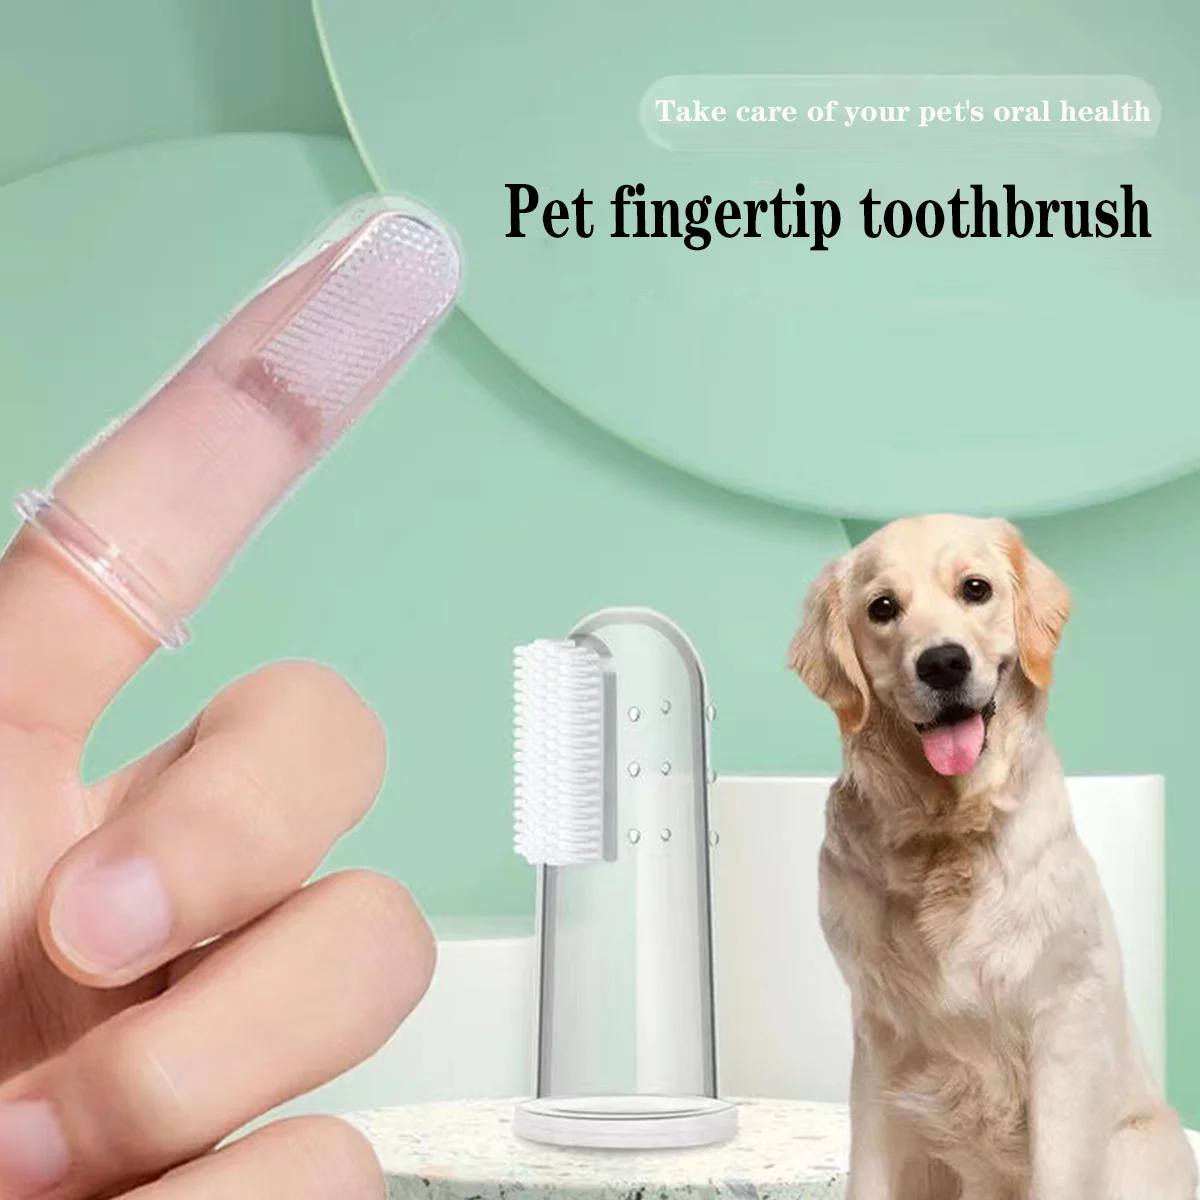 

Dog Super Soft Pet Finger Toothbrush Teeth Cleaning Bad Breath Care Nontoxic Silicone Tooth Brush Tool Dog Cat Cleaning Supplies